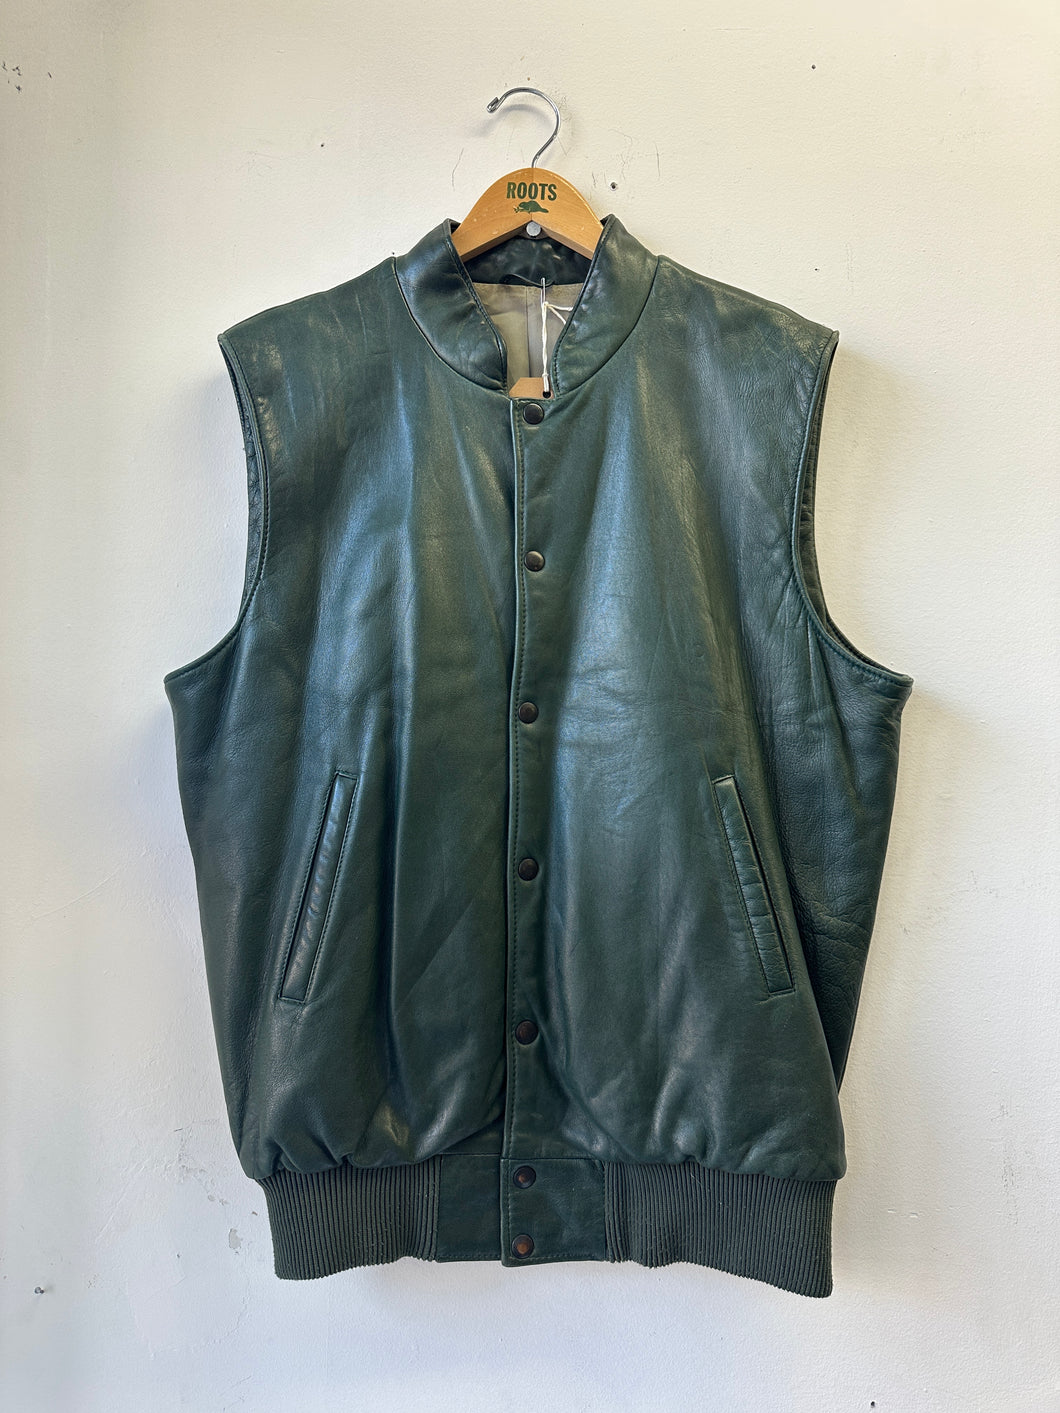 90s Roots Green Leather Vest